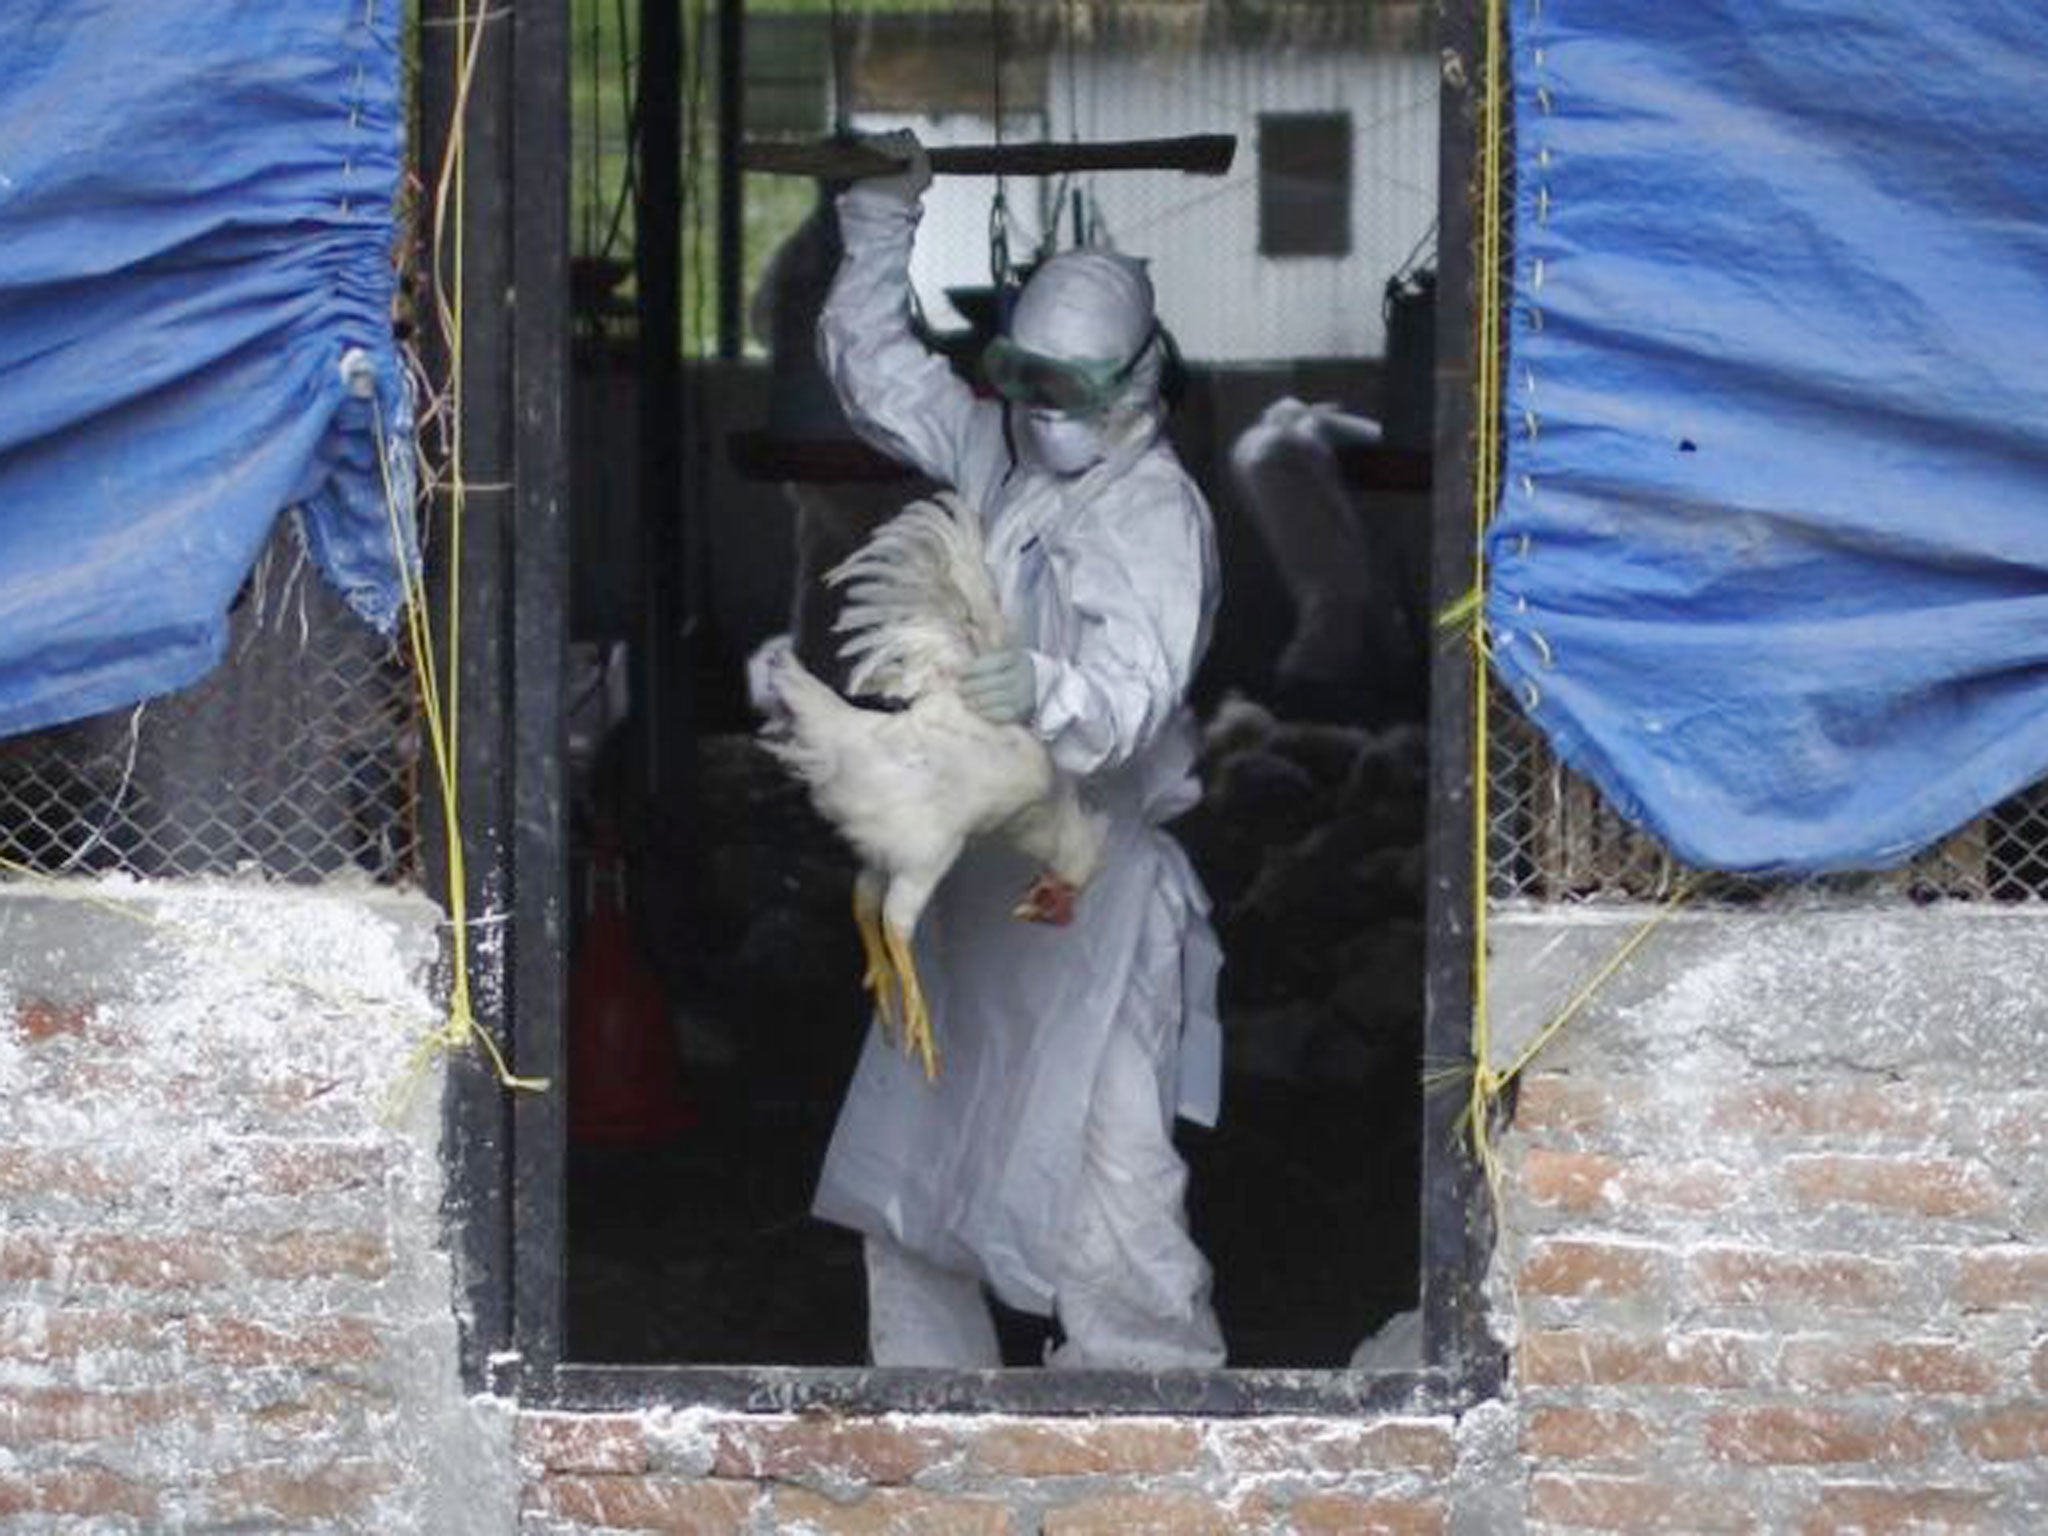 Deadly new strain of bird flu has been transmitted from person to person for the first time